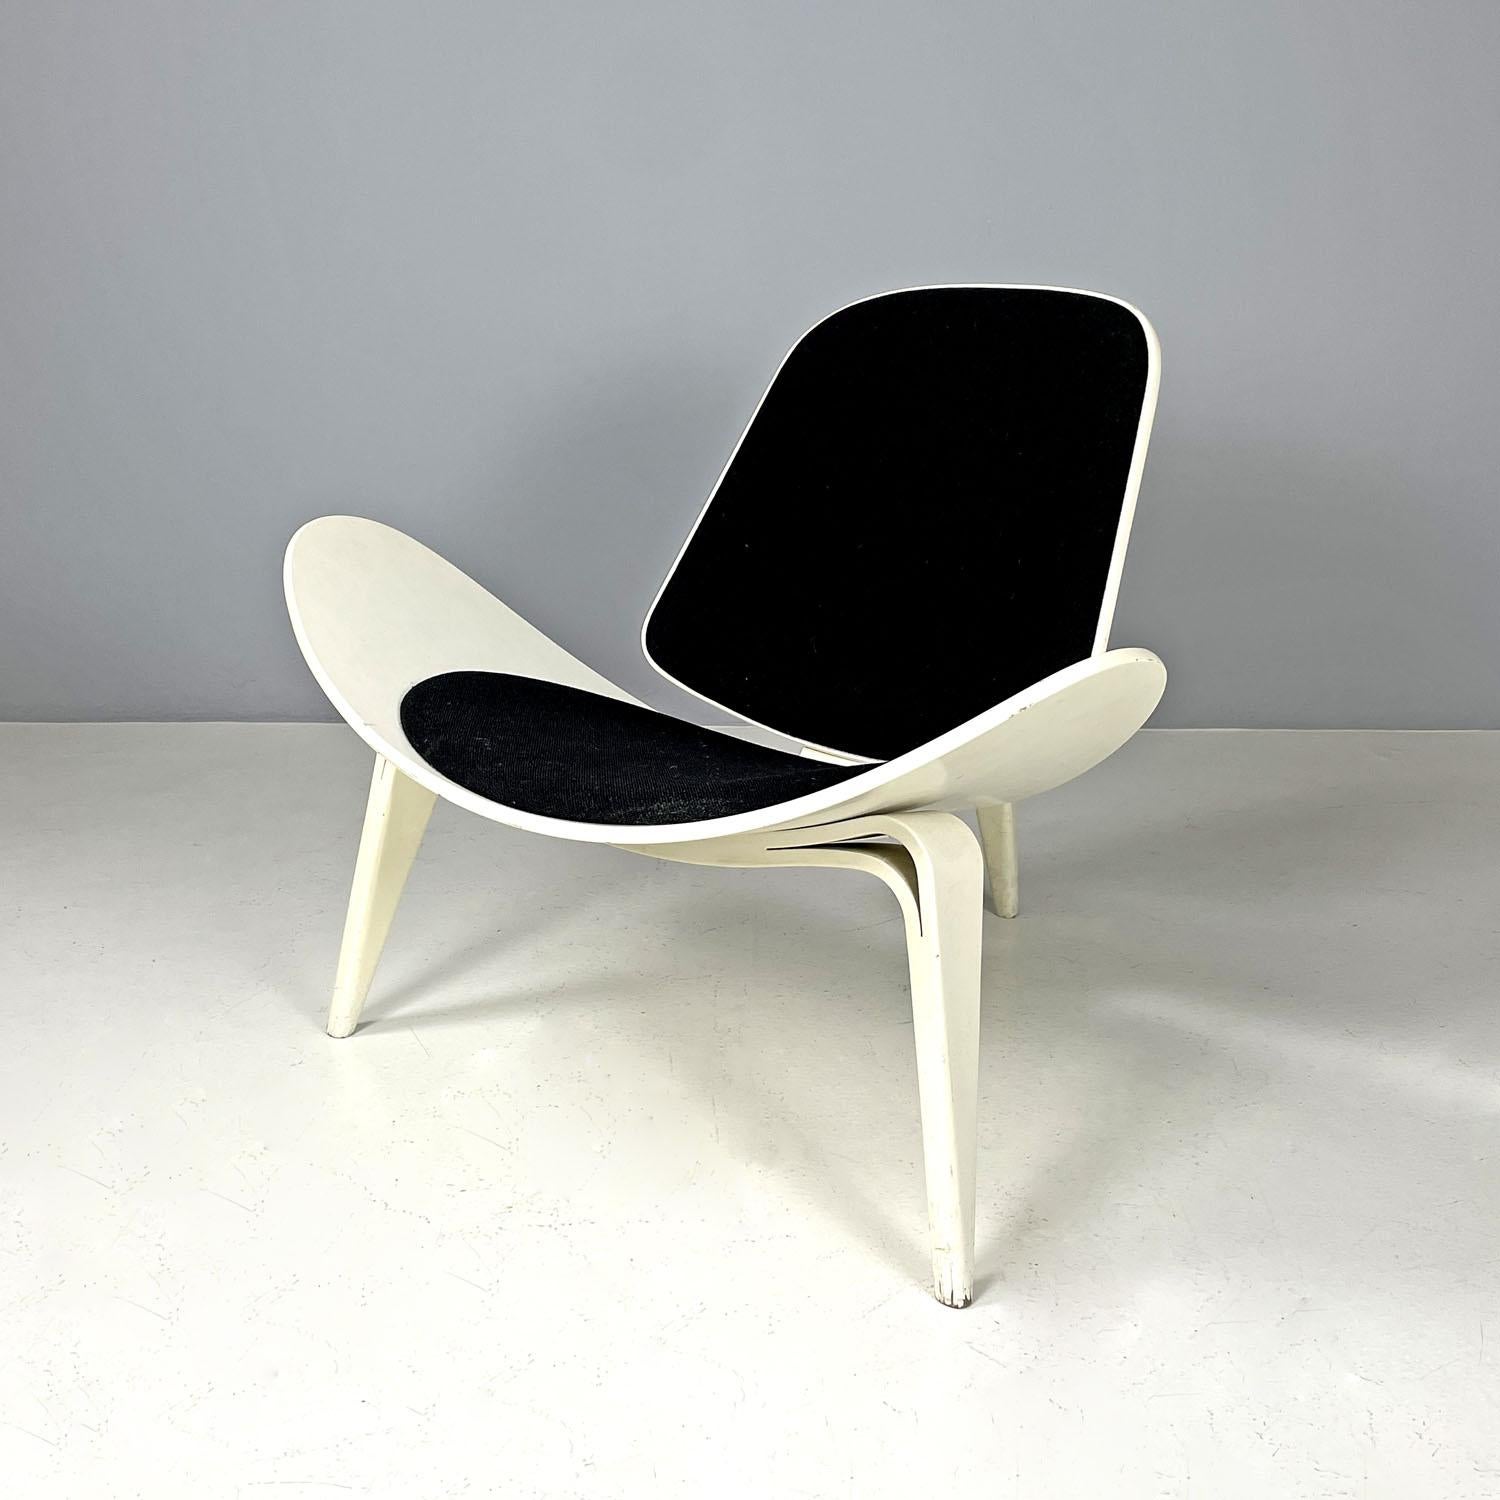 Danish wooden shell chair CH07 by Hans Wegner for Carl Hansen & Søn, 2000s
Shell chair mod. CH07 Shell chair with white lacquered wooden structure. The structure has particular dynamic and enveloping lines, the seat is elongated and the sides